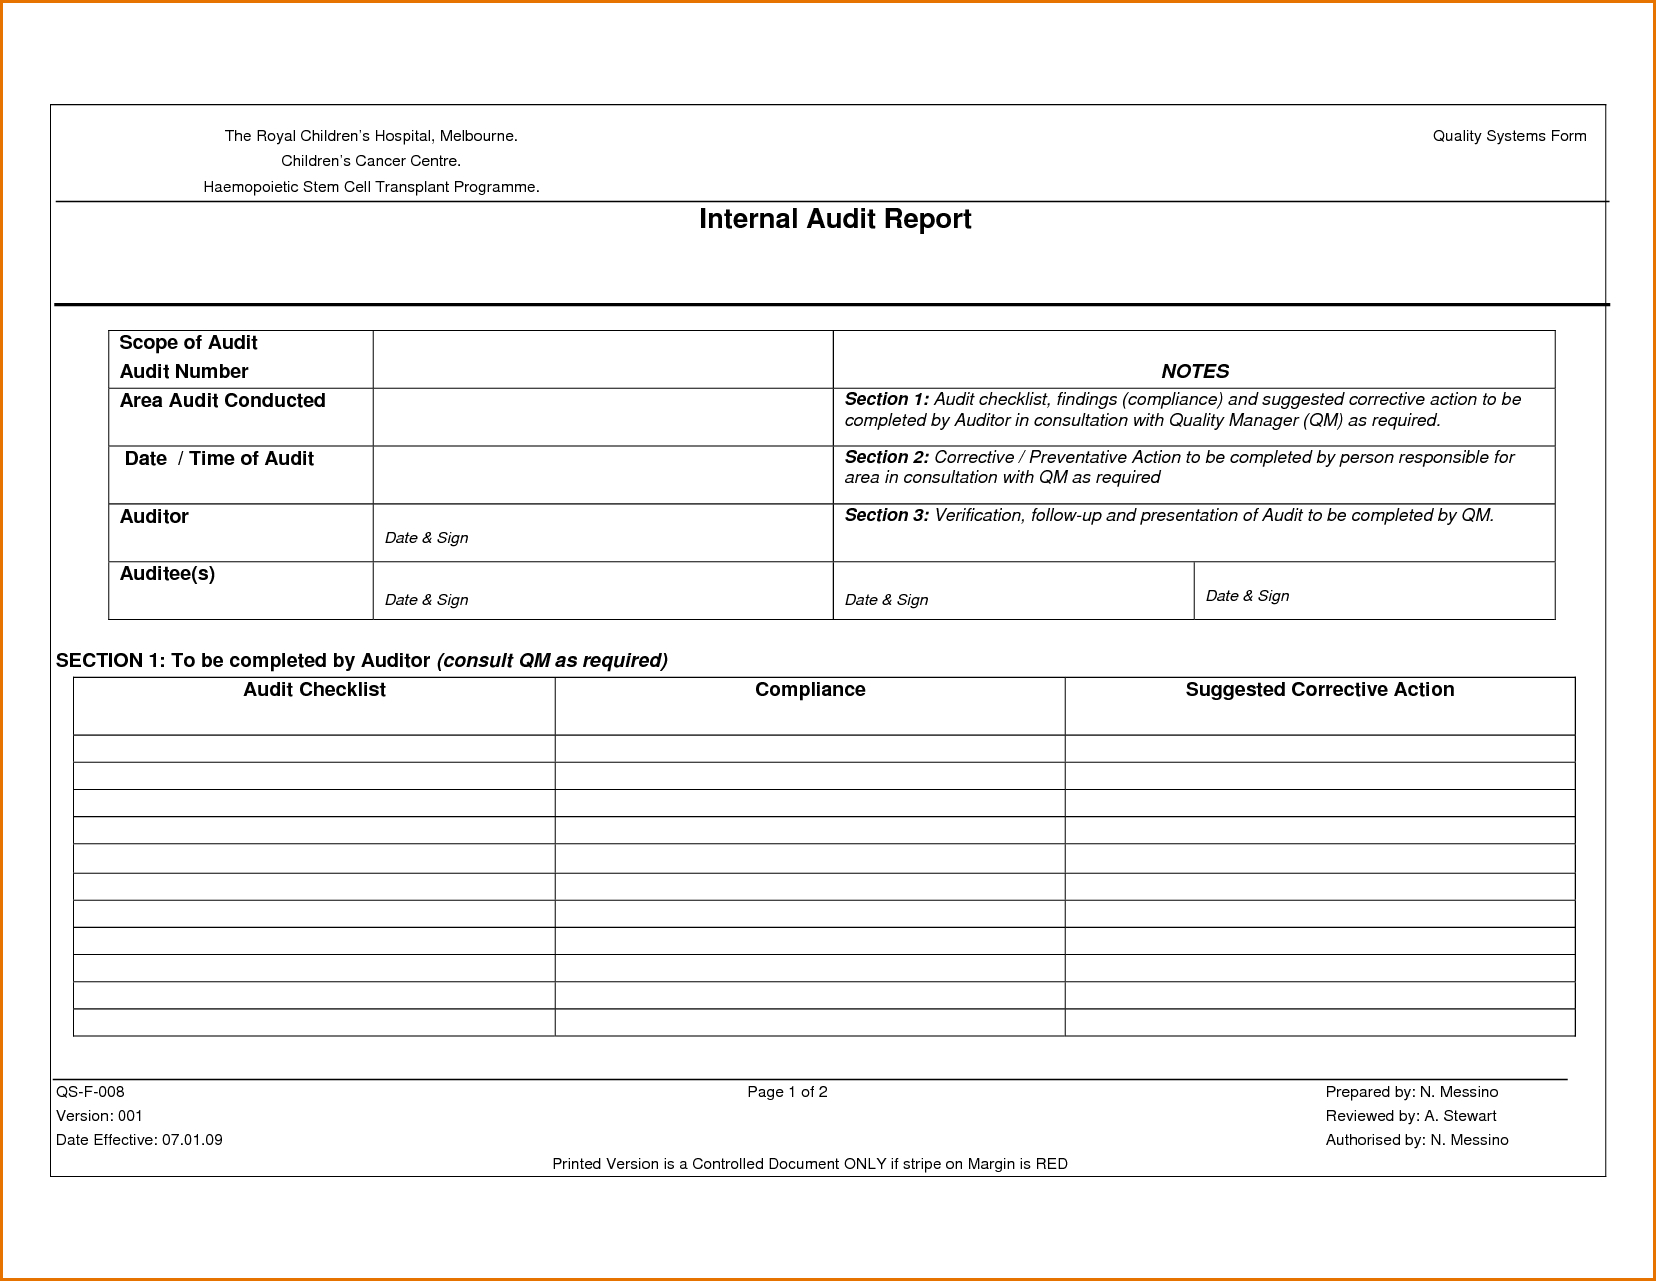 Audit Report Sample Iso Qualified Philippines Financial Pdf Intended For Internal Audit Report Template Iso 9001